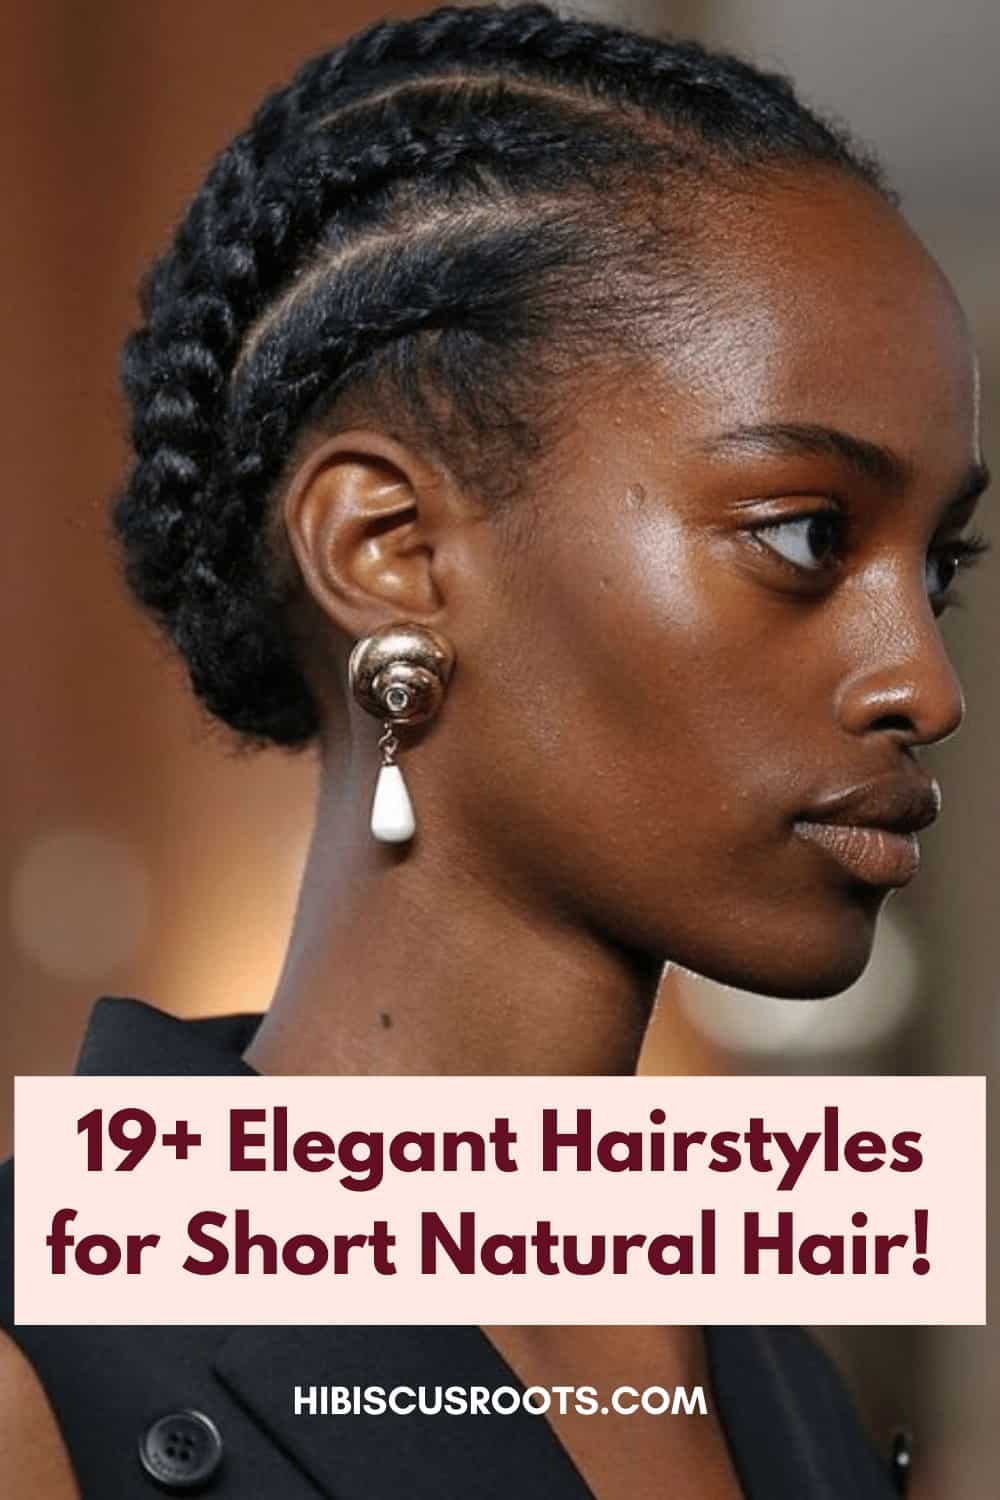 19+ Cute Hairstyles for Short to Medium Natural Hair in 2022!